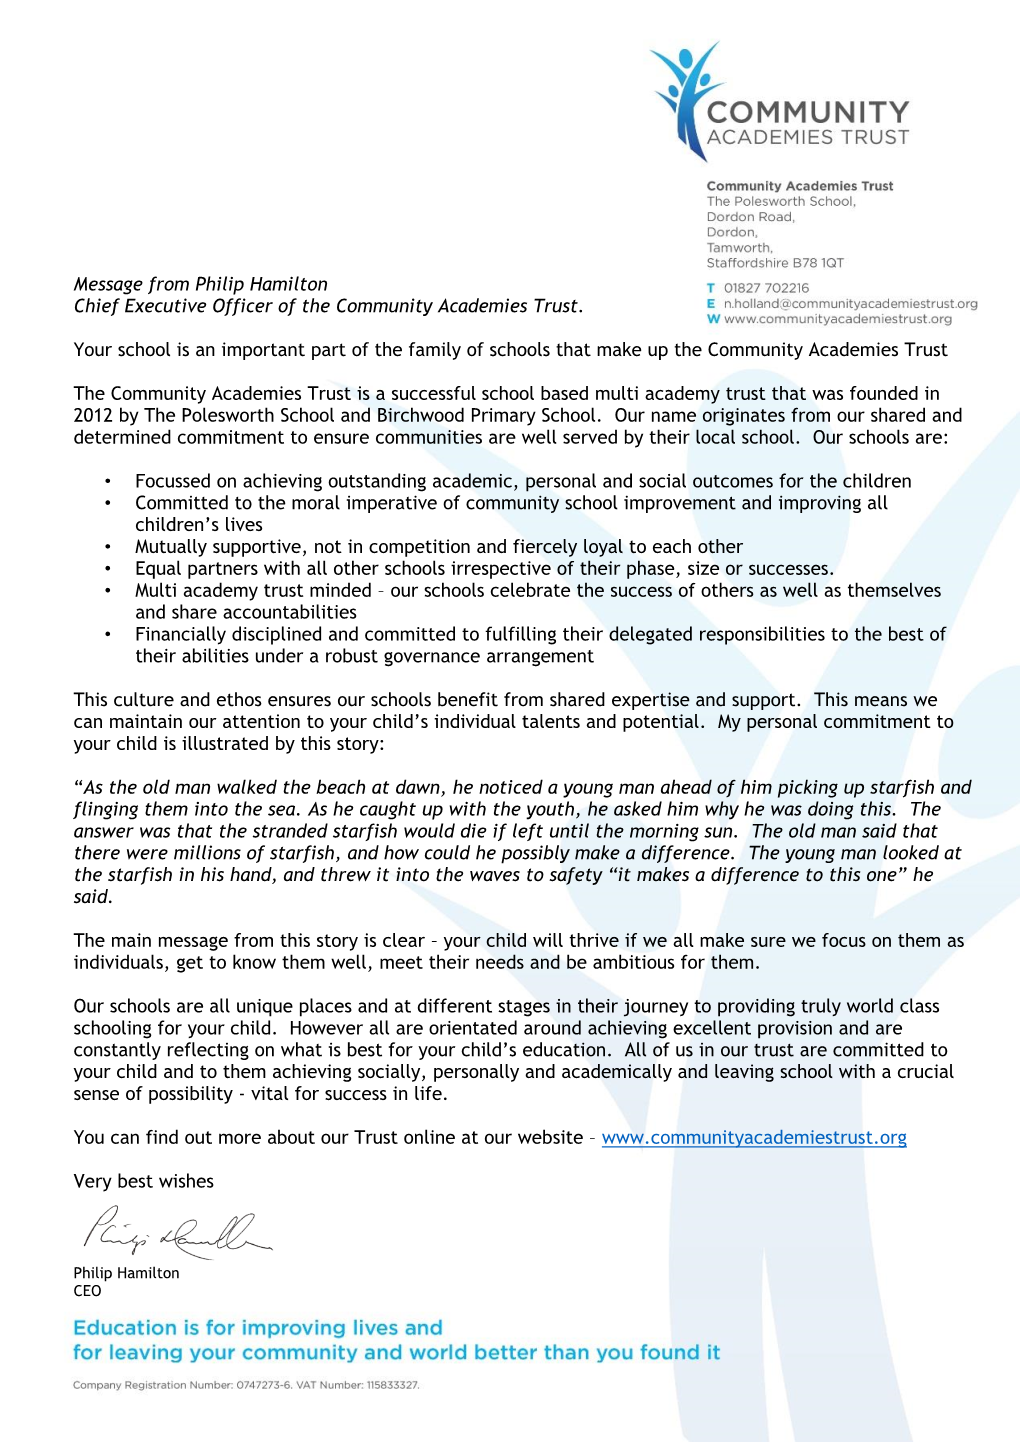 Message from Philip Hamilton Chief Executive Officer of the Community Academies Trust